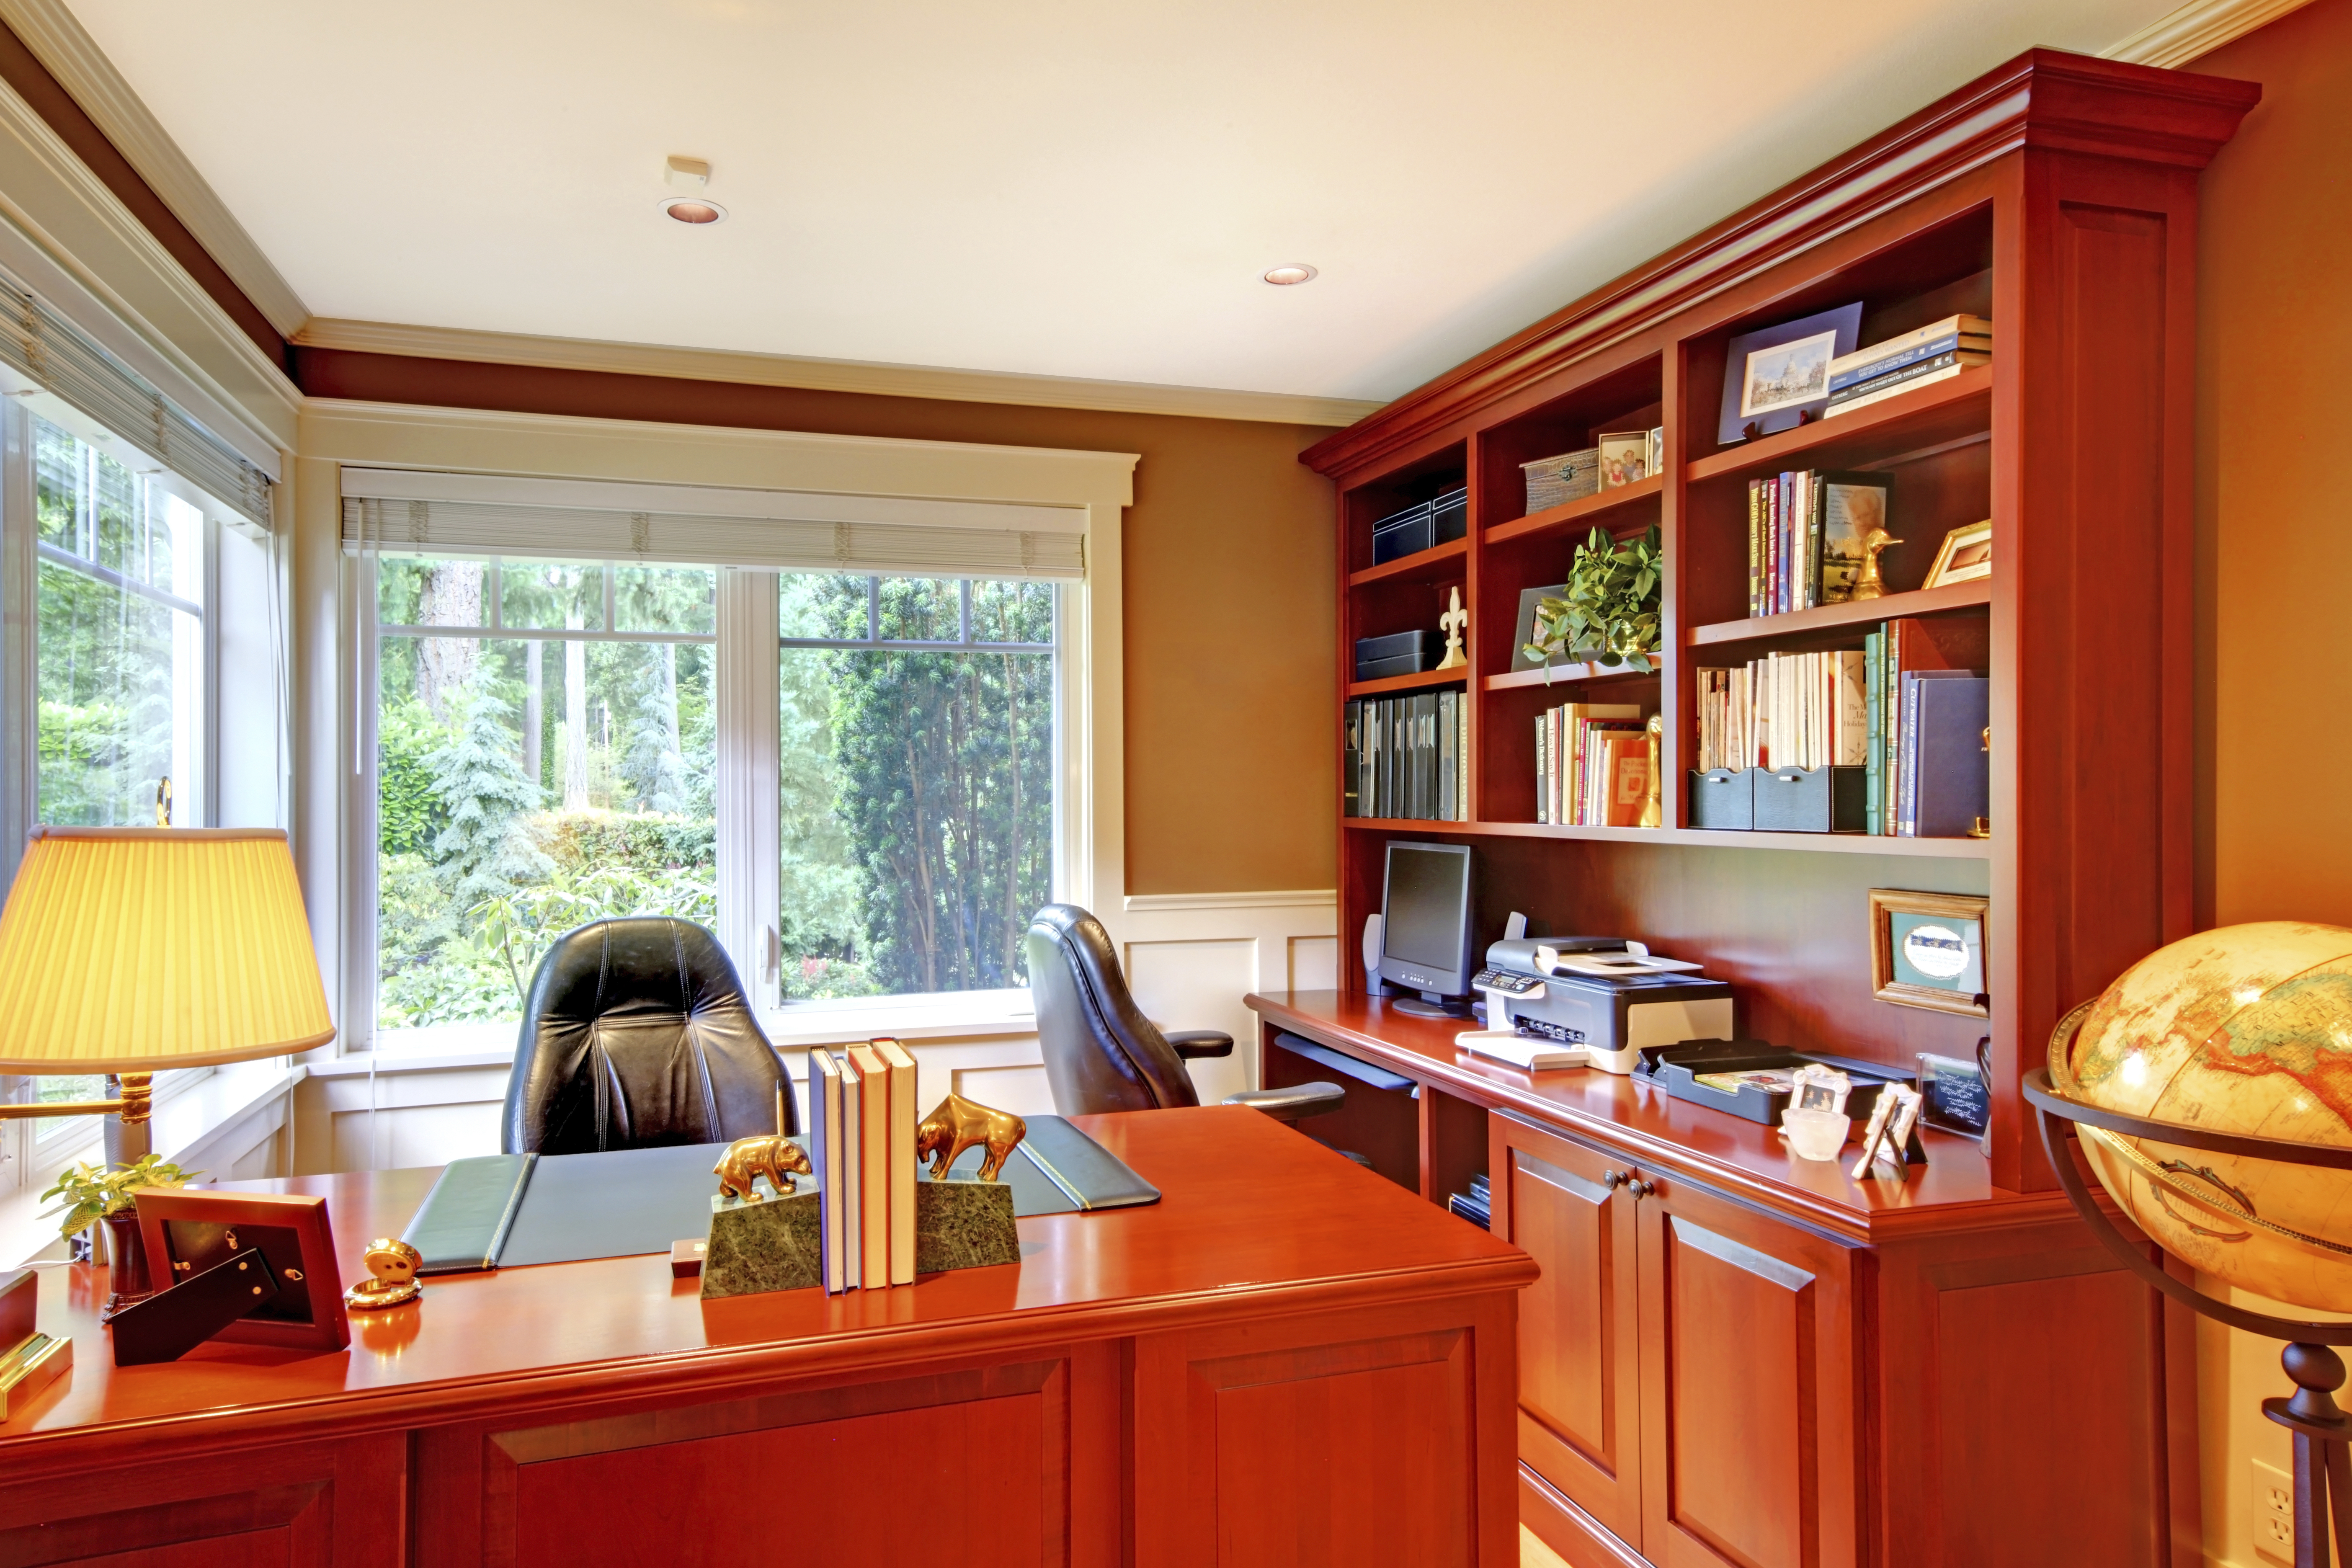 Office luxury interior with grey walls and wood. Furnished with wooden desk and leather chairs. | Source: Shutterstock